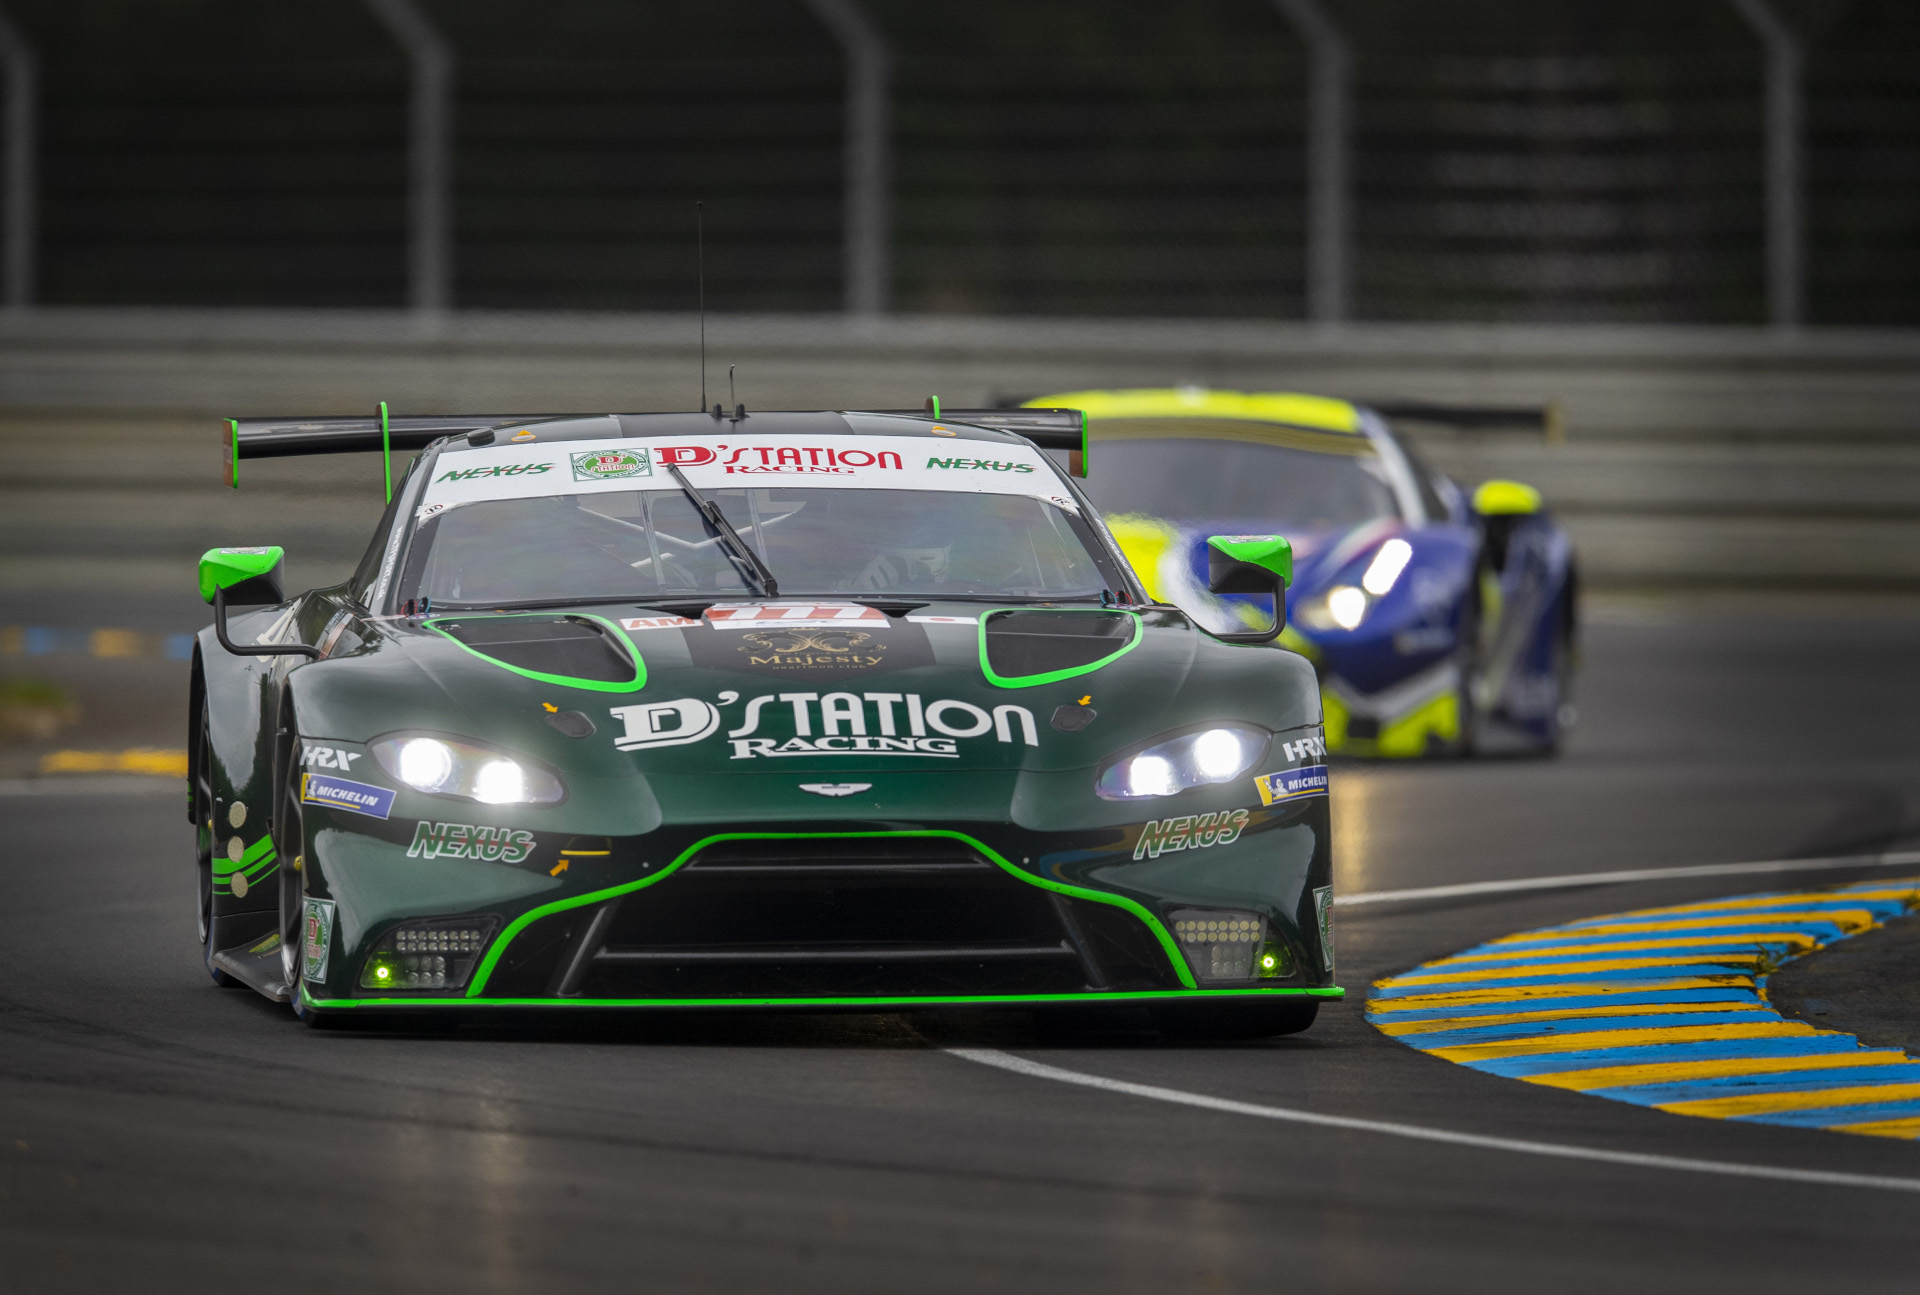 Aston Martin Vantage GTE going for third victory of the current WEC season